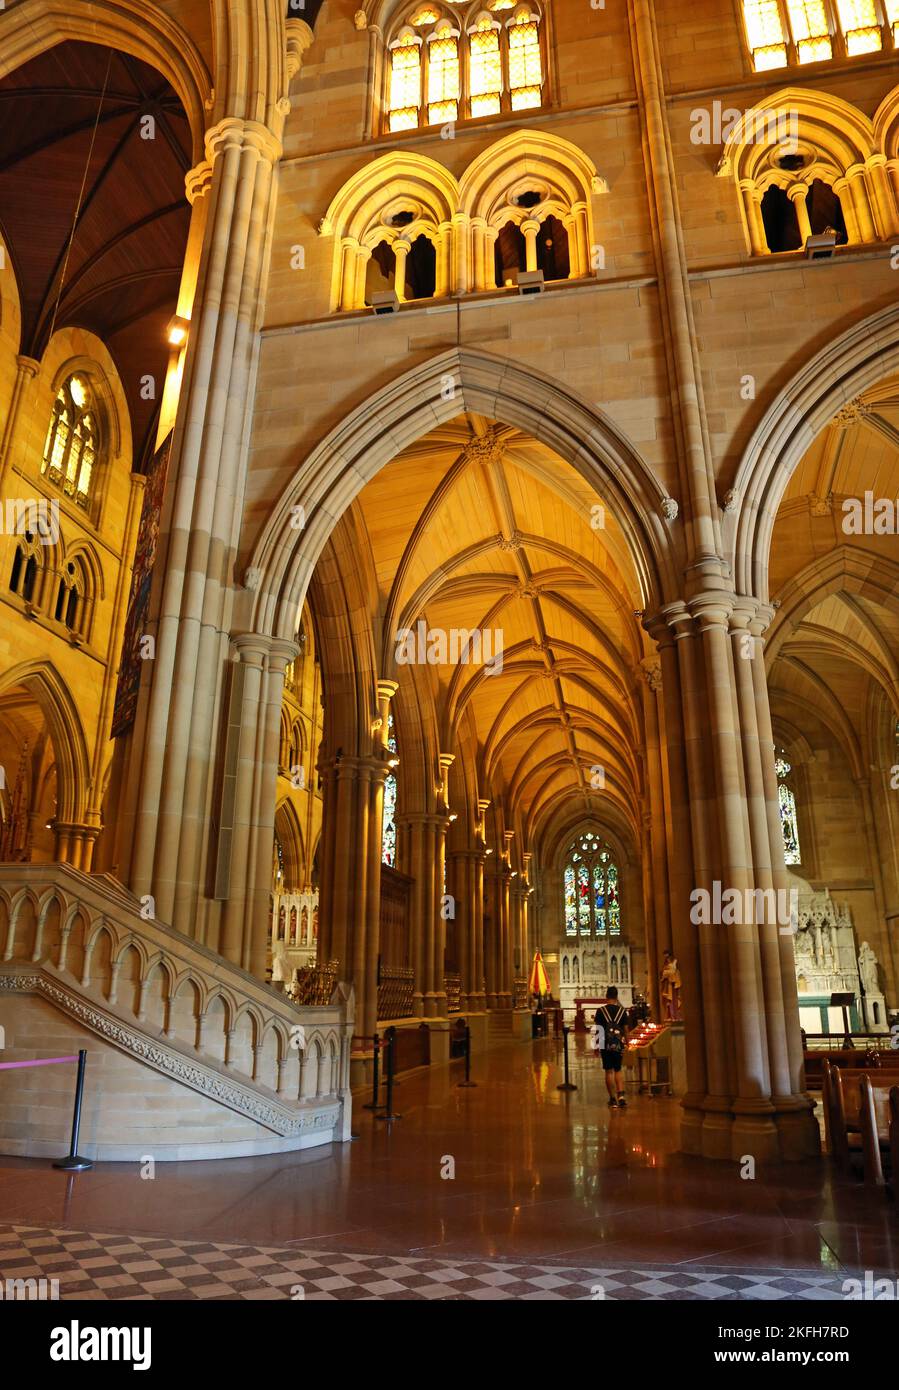 Looking into the side nave - St Mary's Cathedral - Sydney, Australia Stock Photo